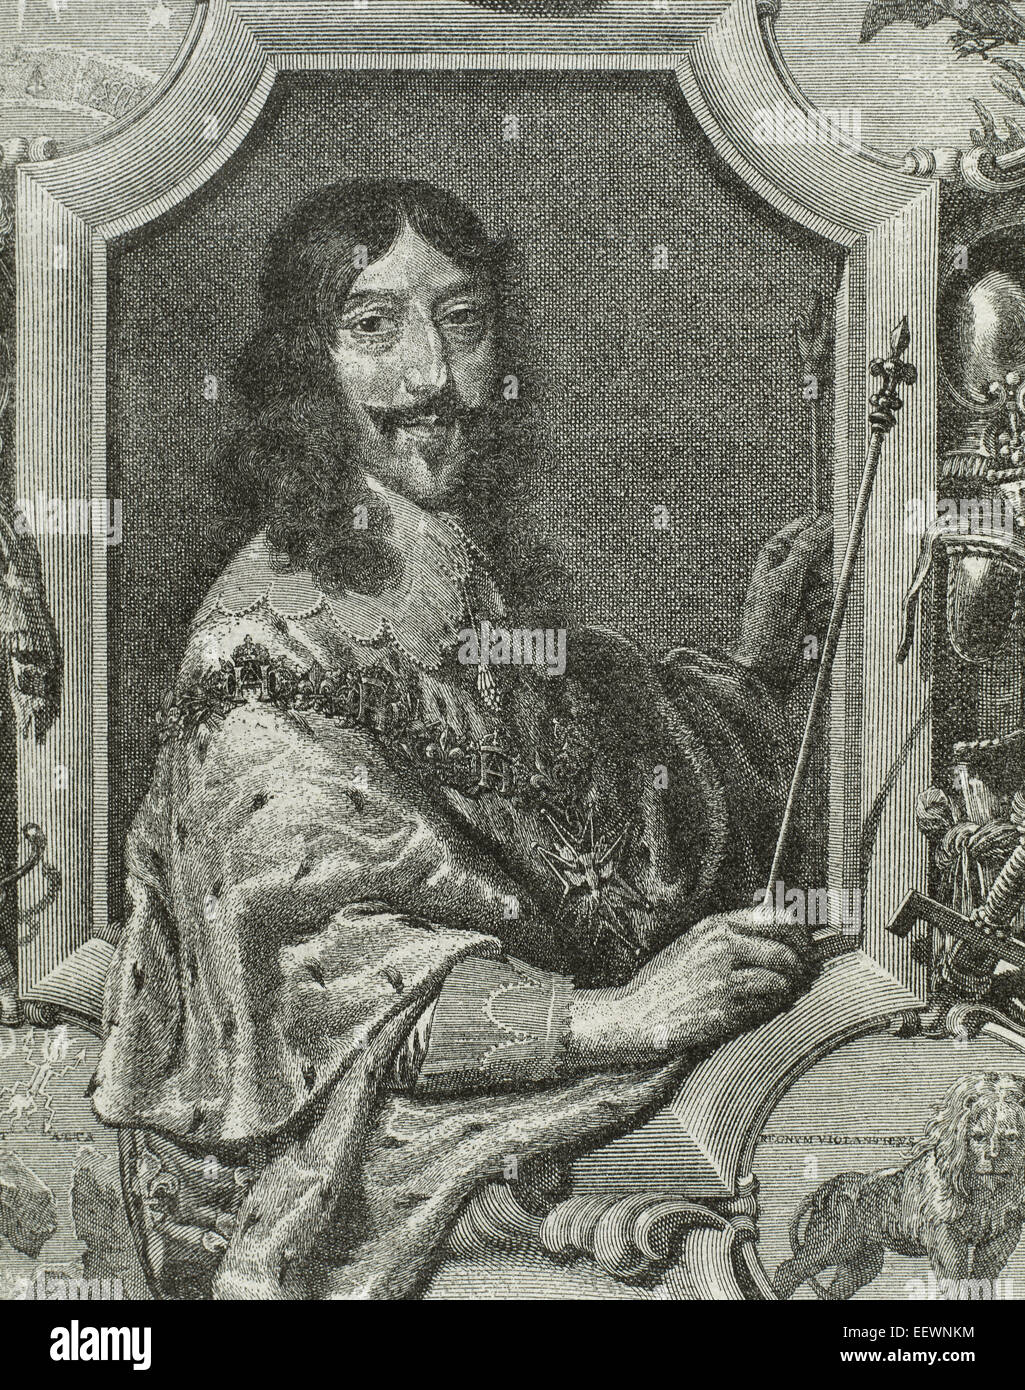 Louis XIII (1601-1643). King of France. Portrait. Engraving in 'La Historia Universal', 1885. Stock Photo